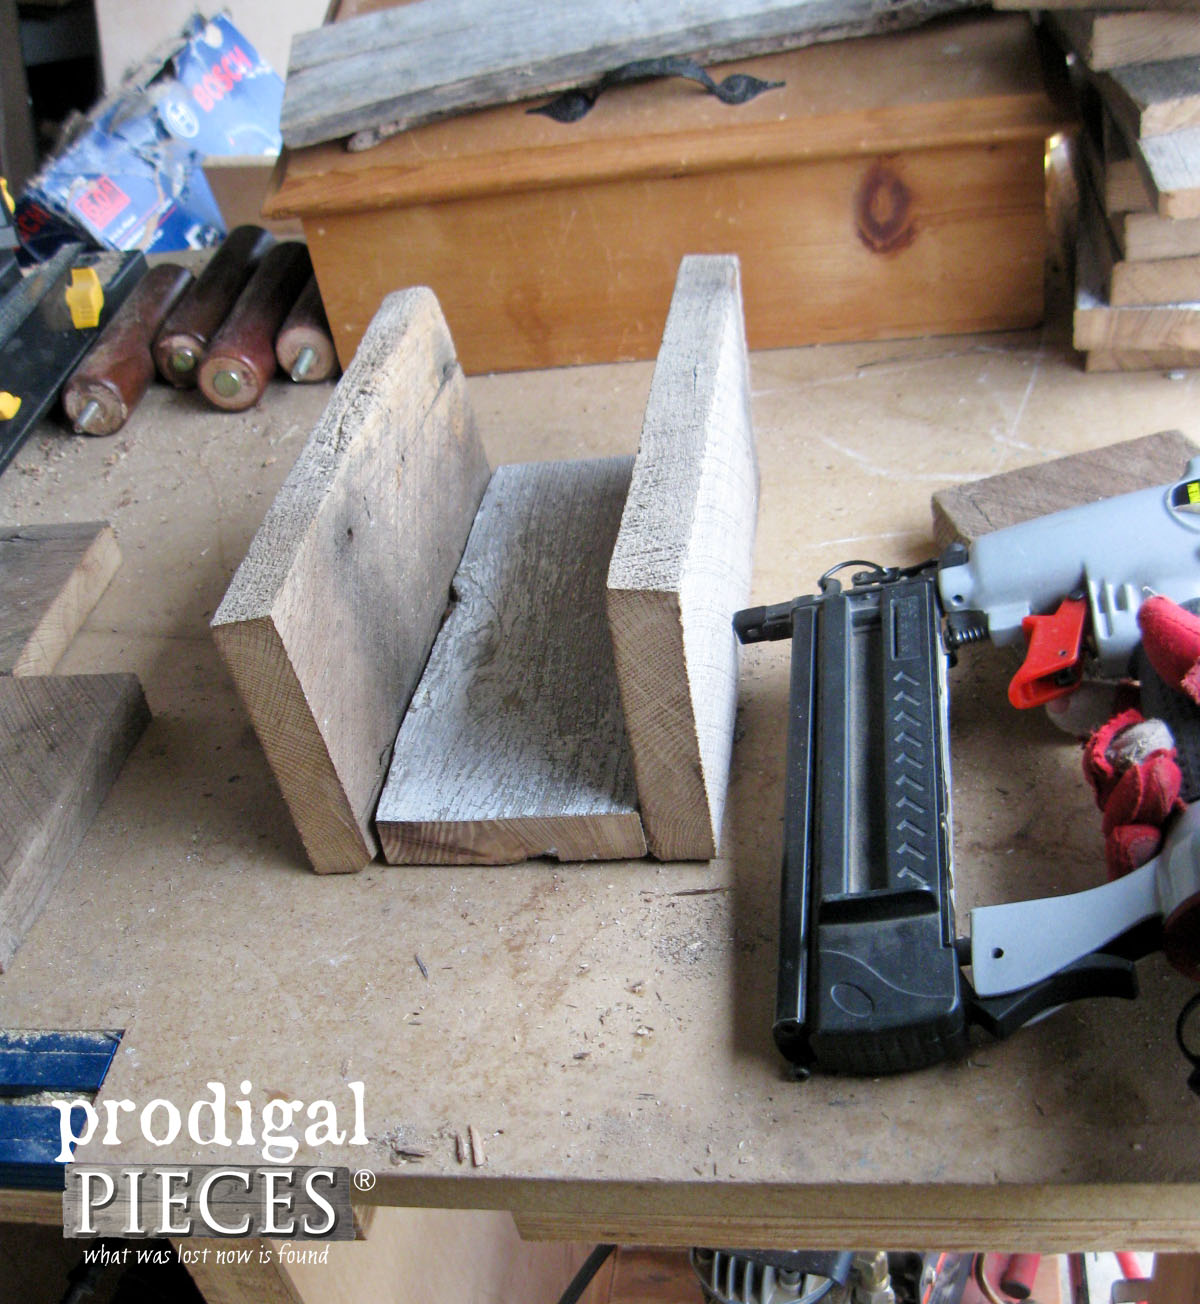 Nailing Wooden Caddy Sides Together | Prodigal Pieces | www.prodigalpieces.com